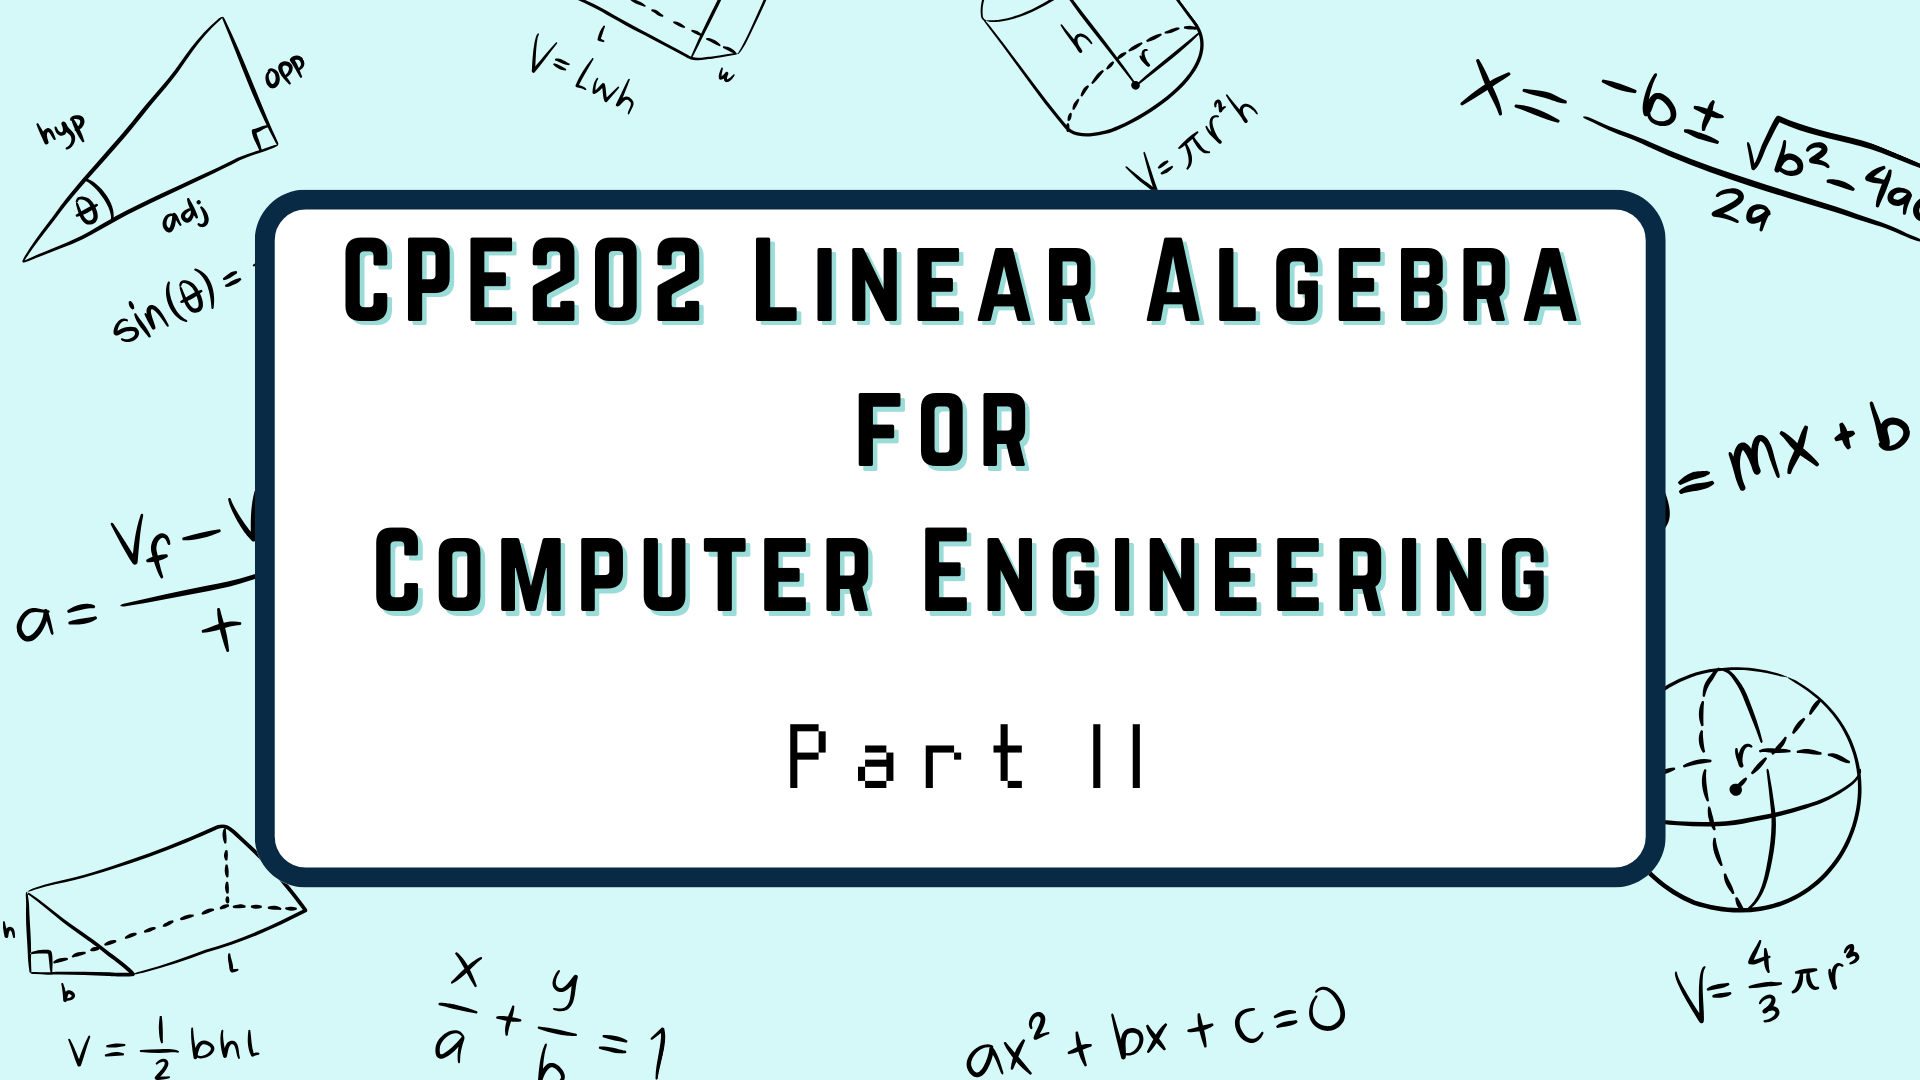 CPE202 Linear Algebra for Computer Engineering (Part II)